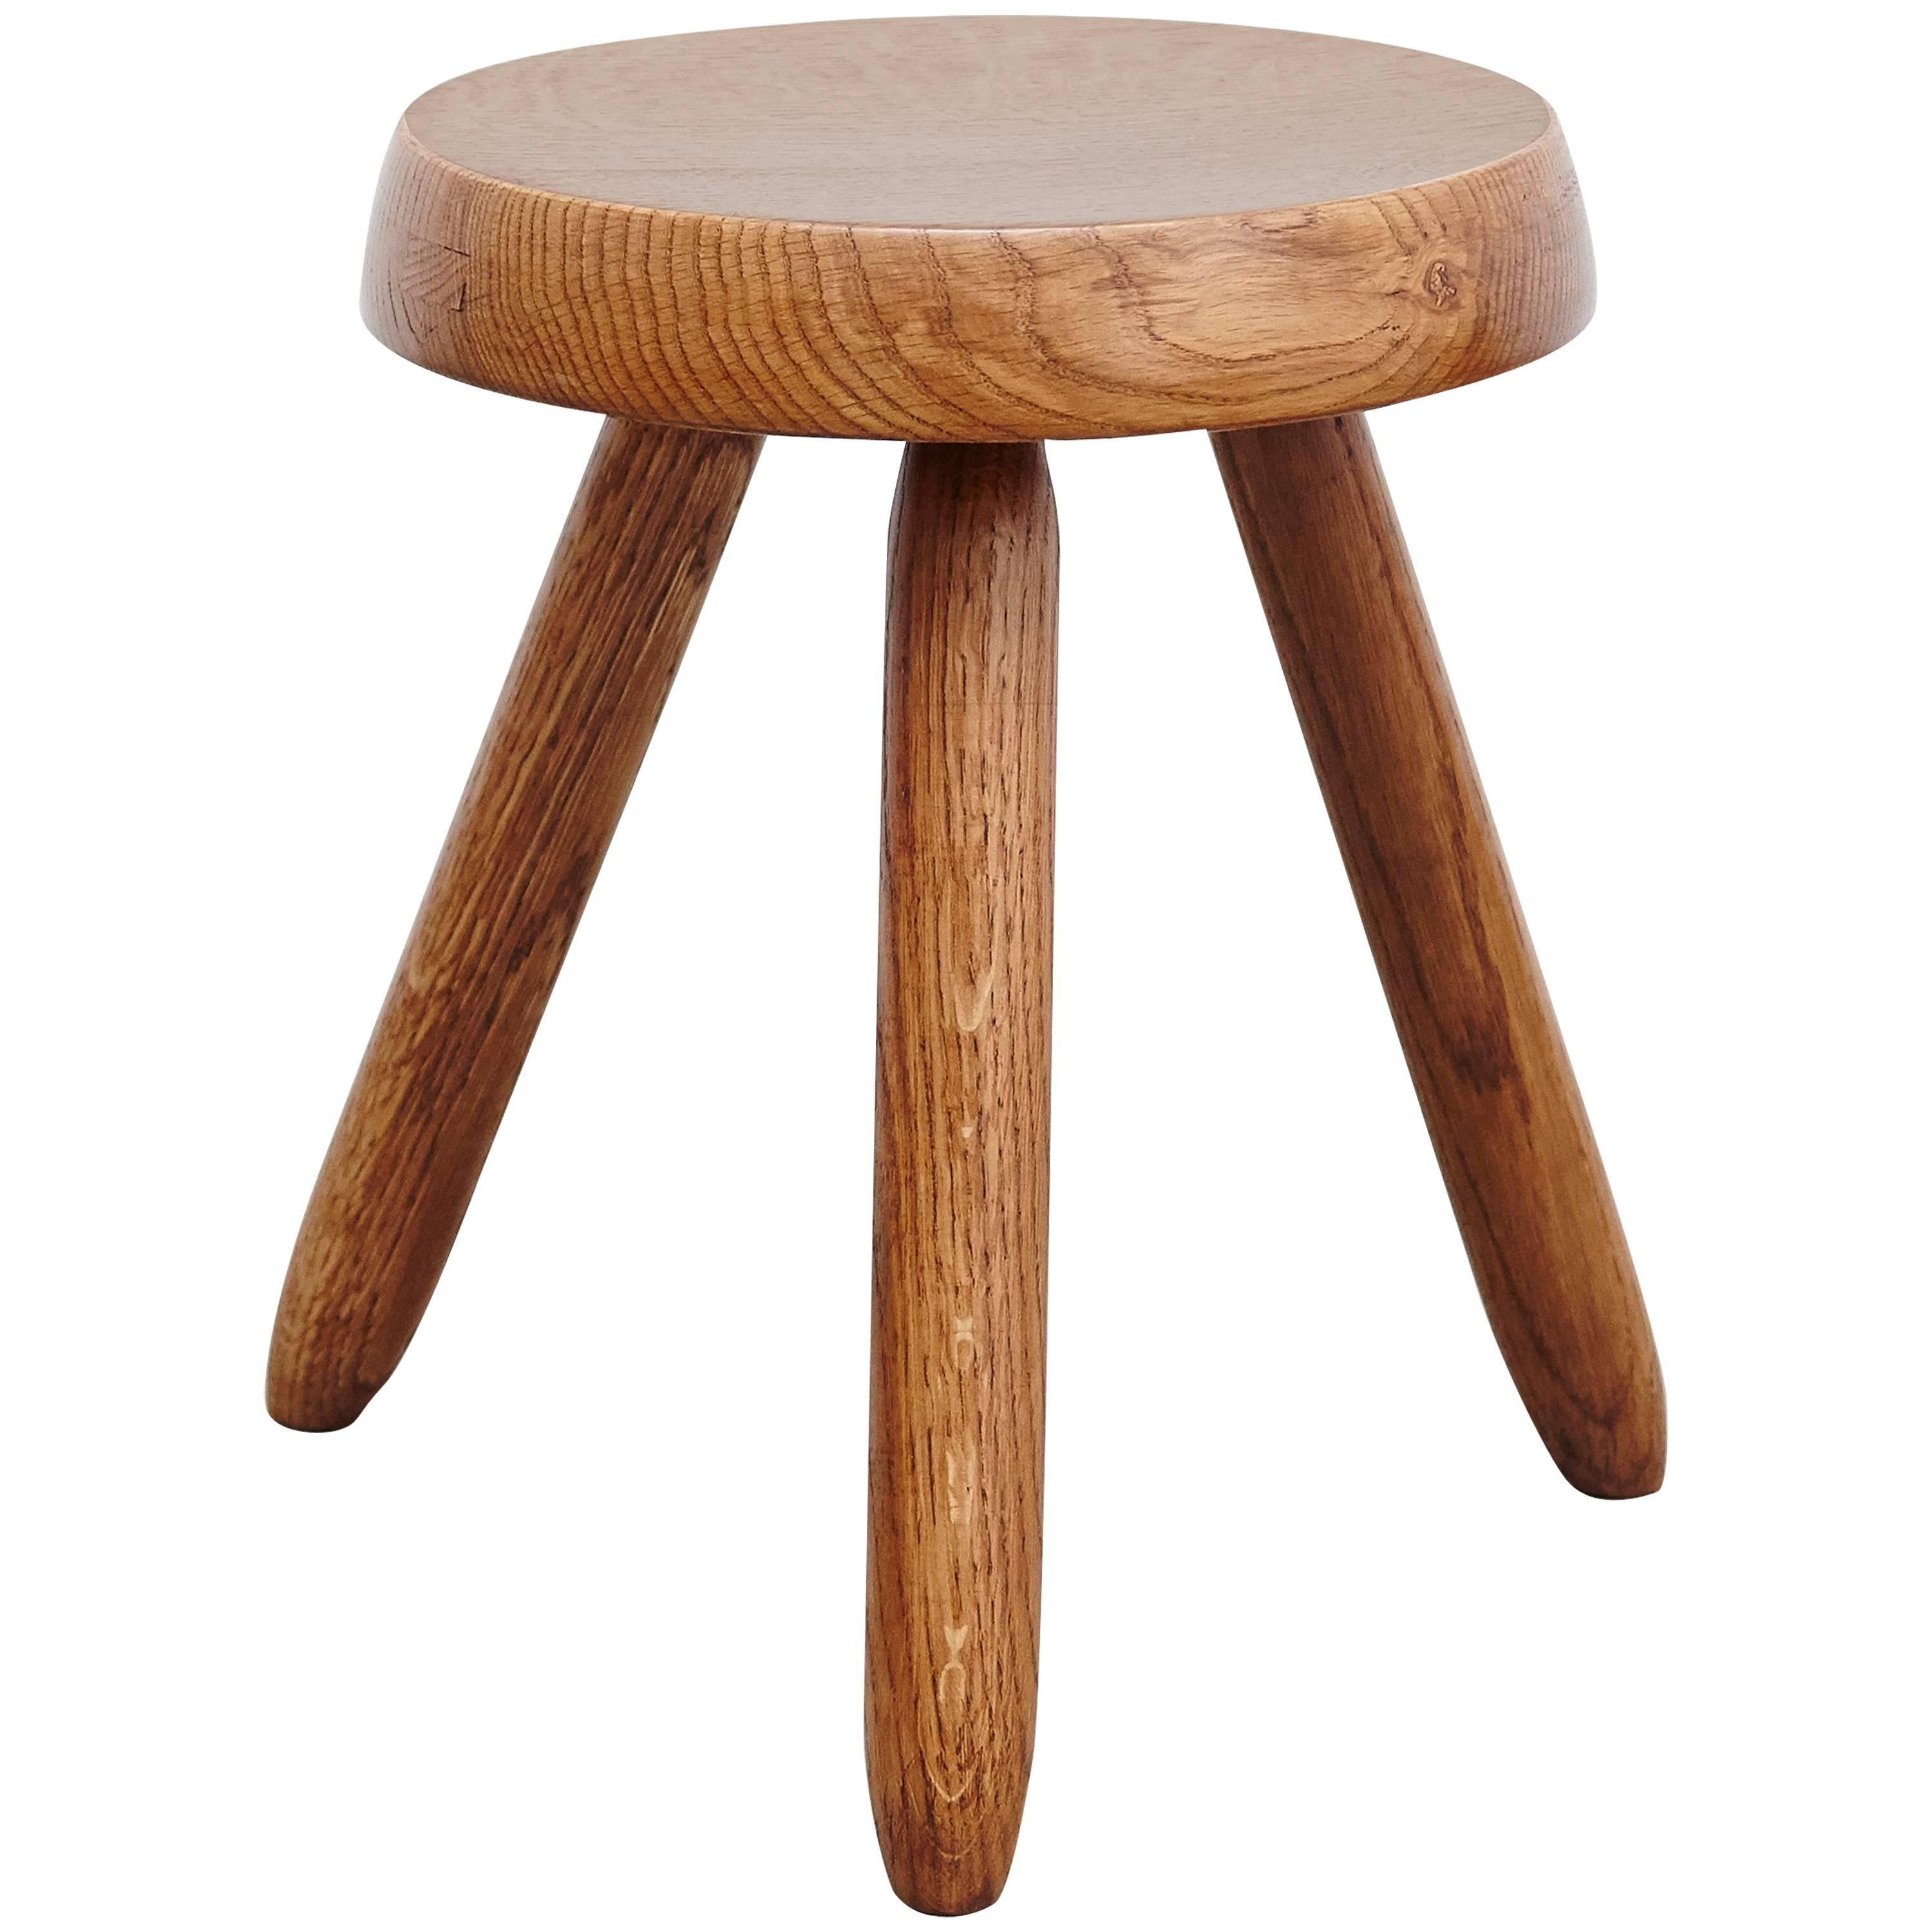 Stool in the Style of Charlotte Perriand